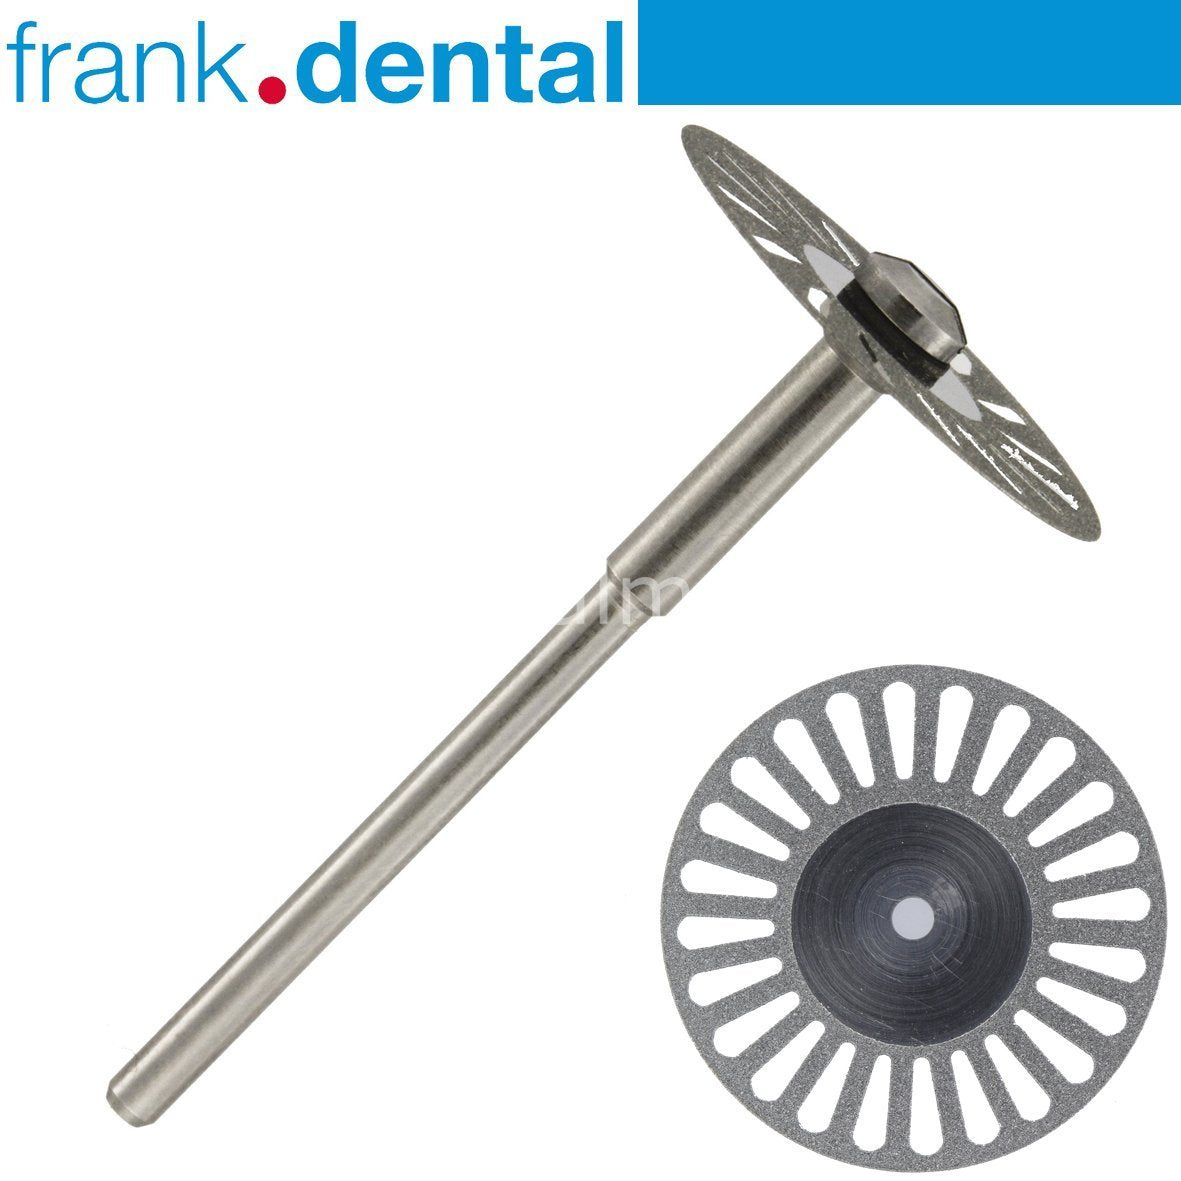 DentrealStore - Frank Dental Ortho Diamond Disc Interface Separe - Double Sided Etching